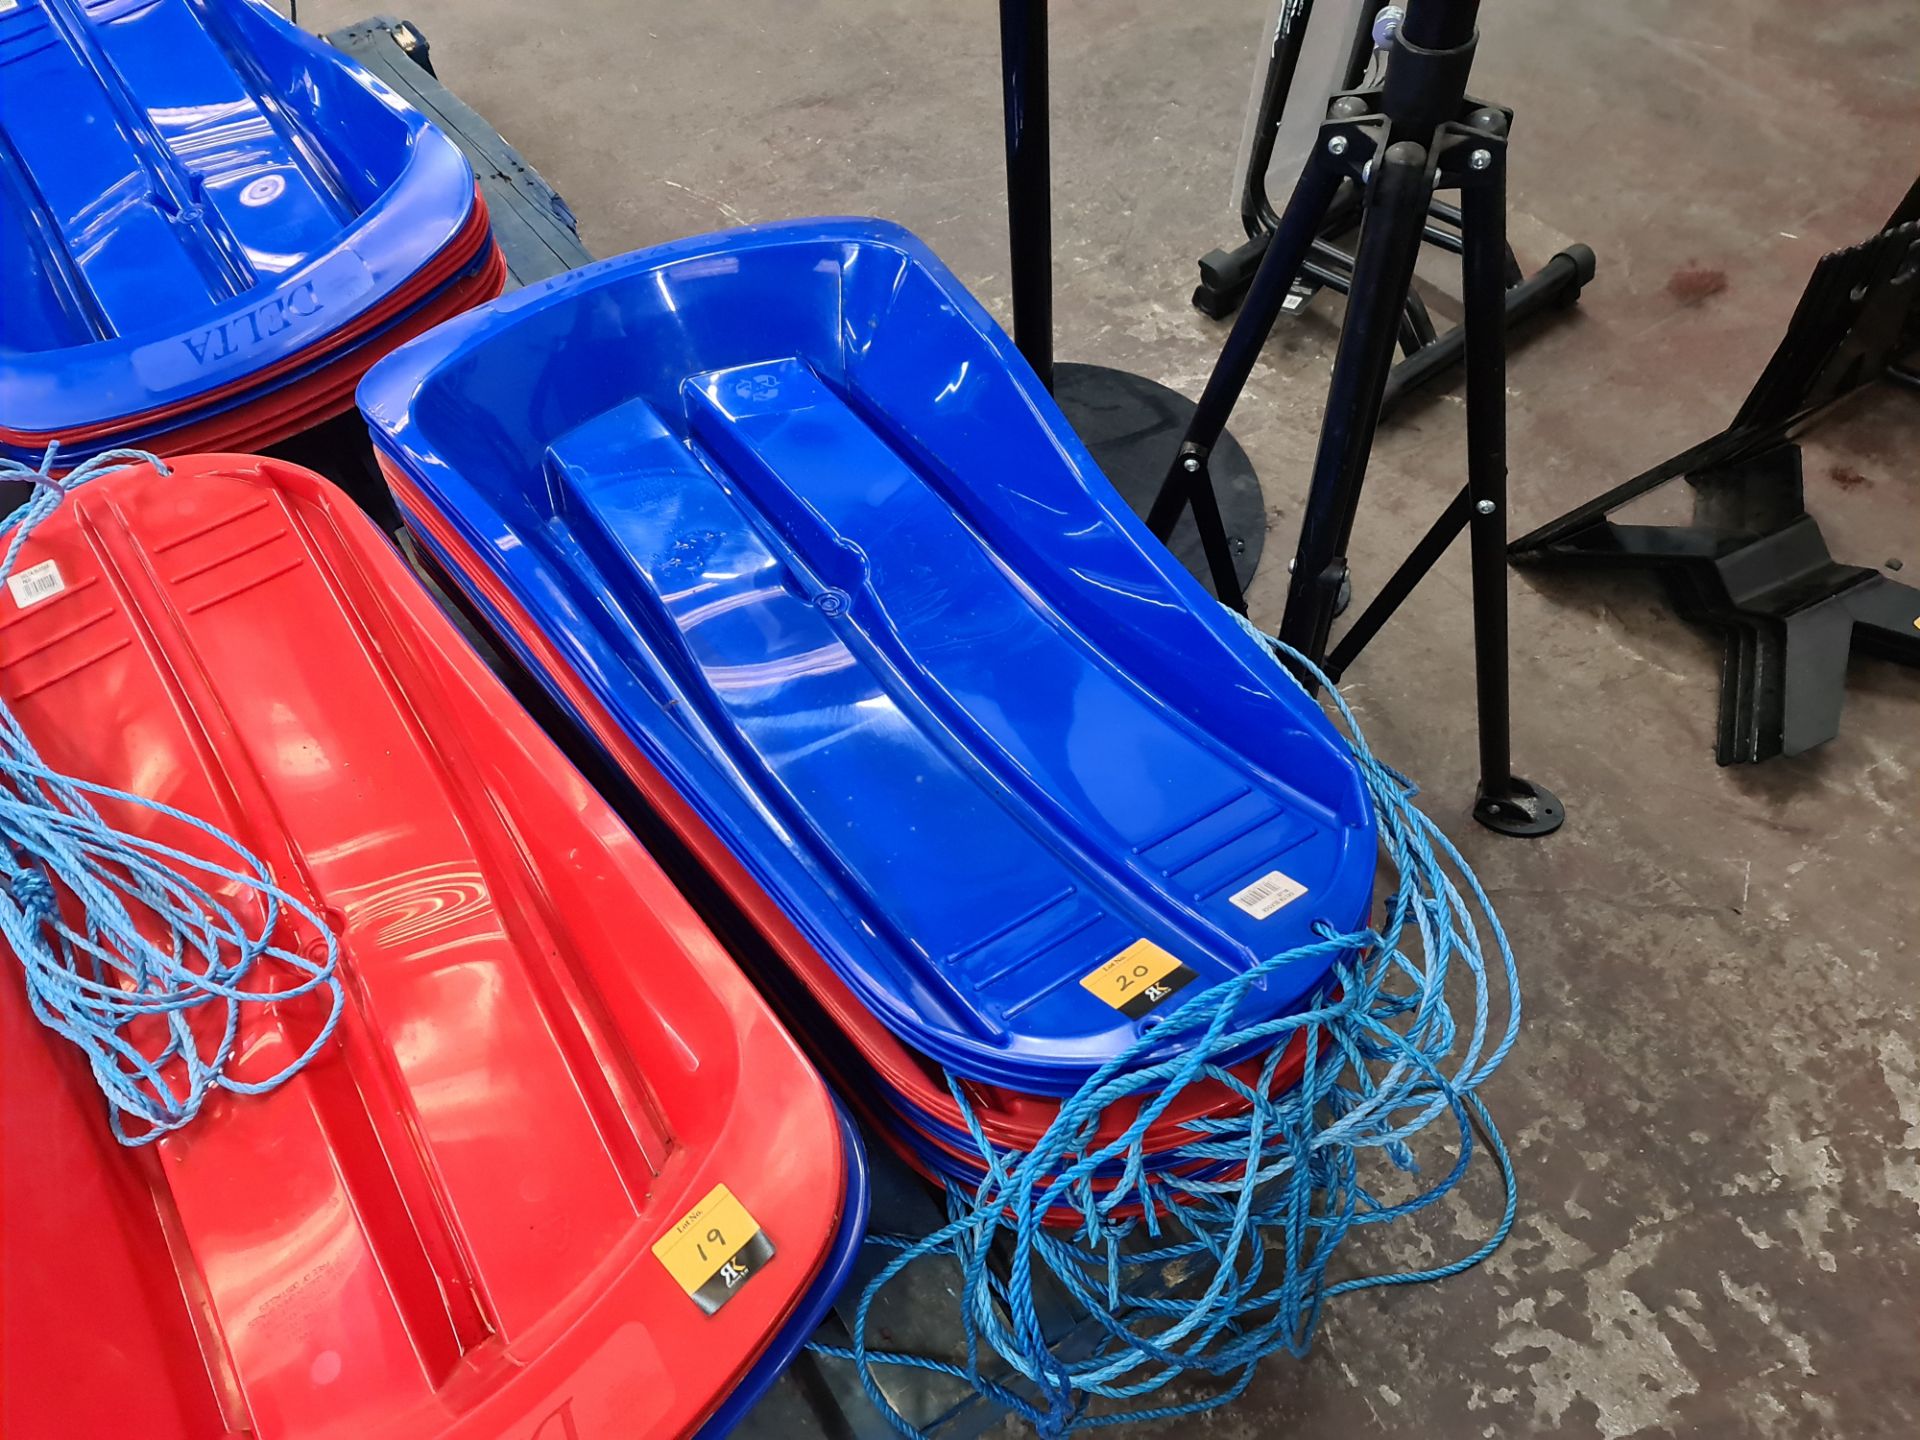 13 off Delta sledges - mixed lot of blue and red